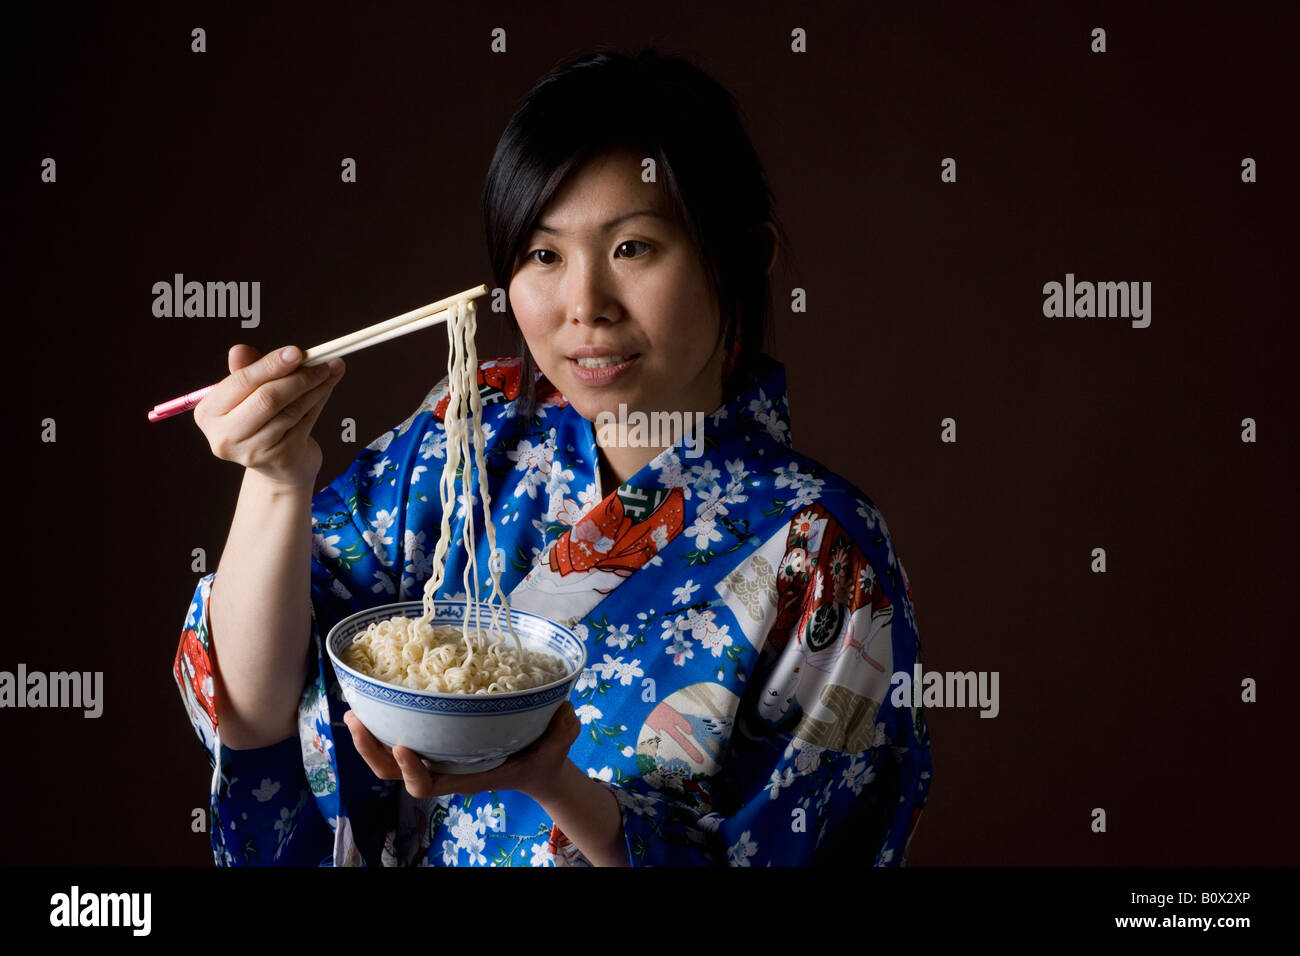 A woman dressed in a kimono eating noodles Stock Photo